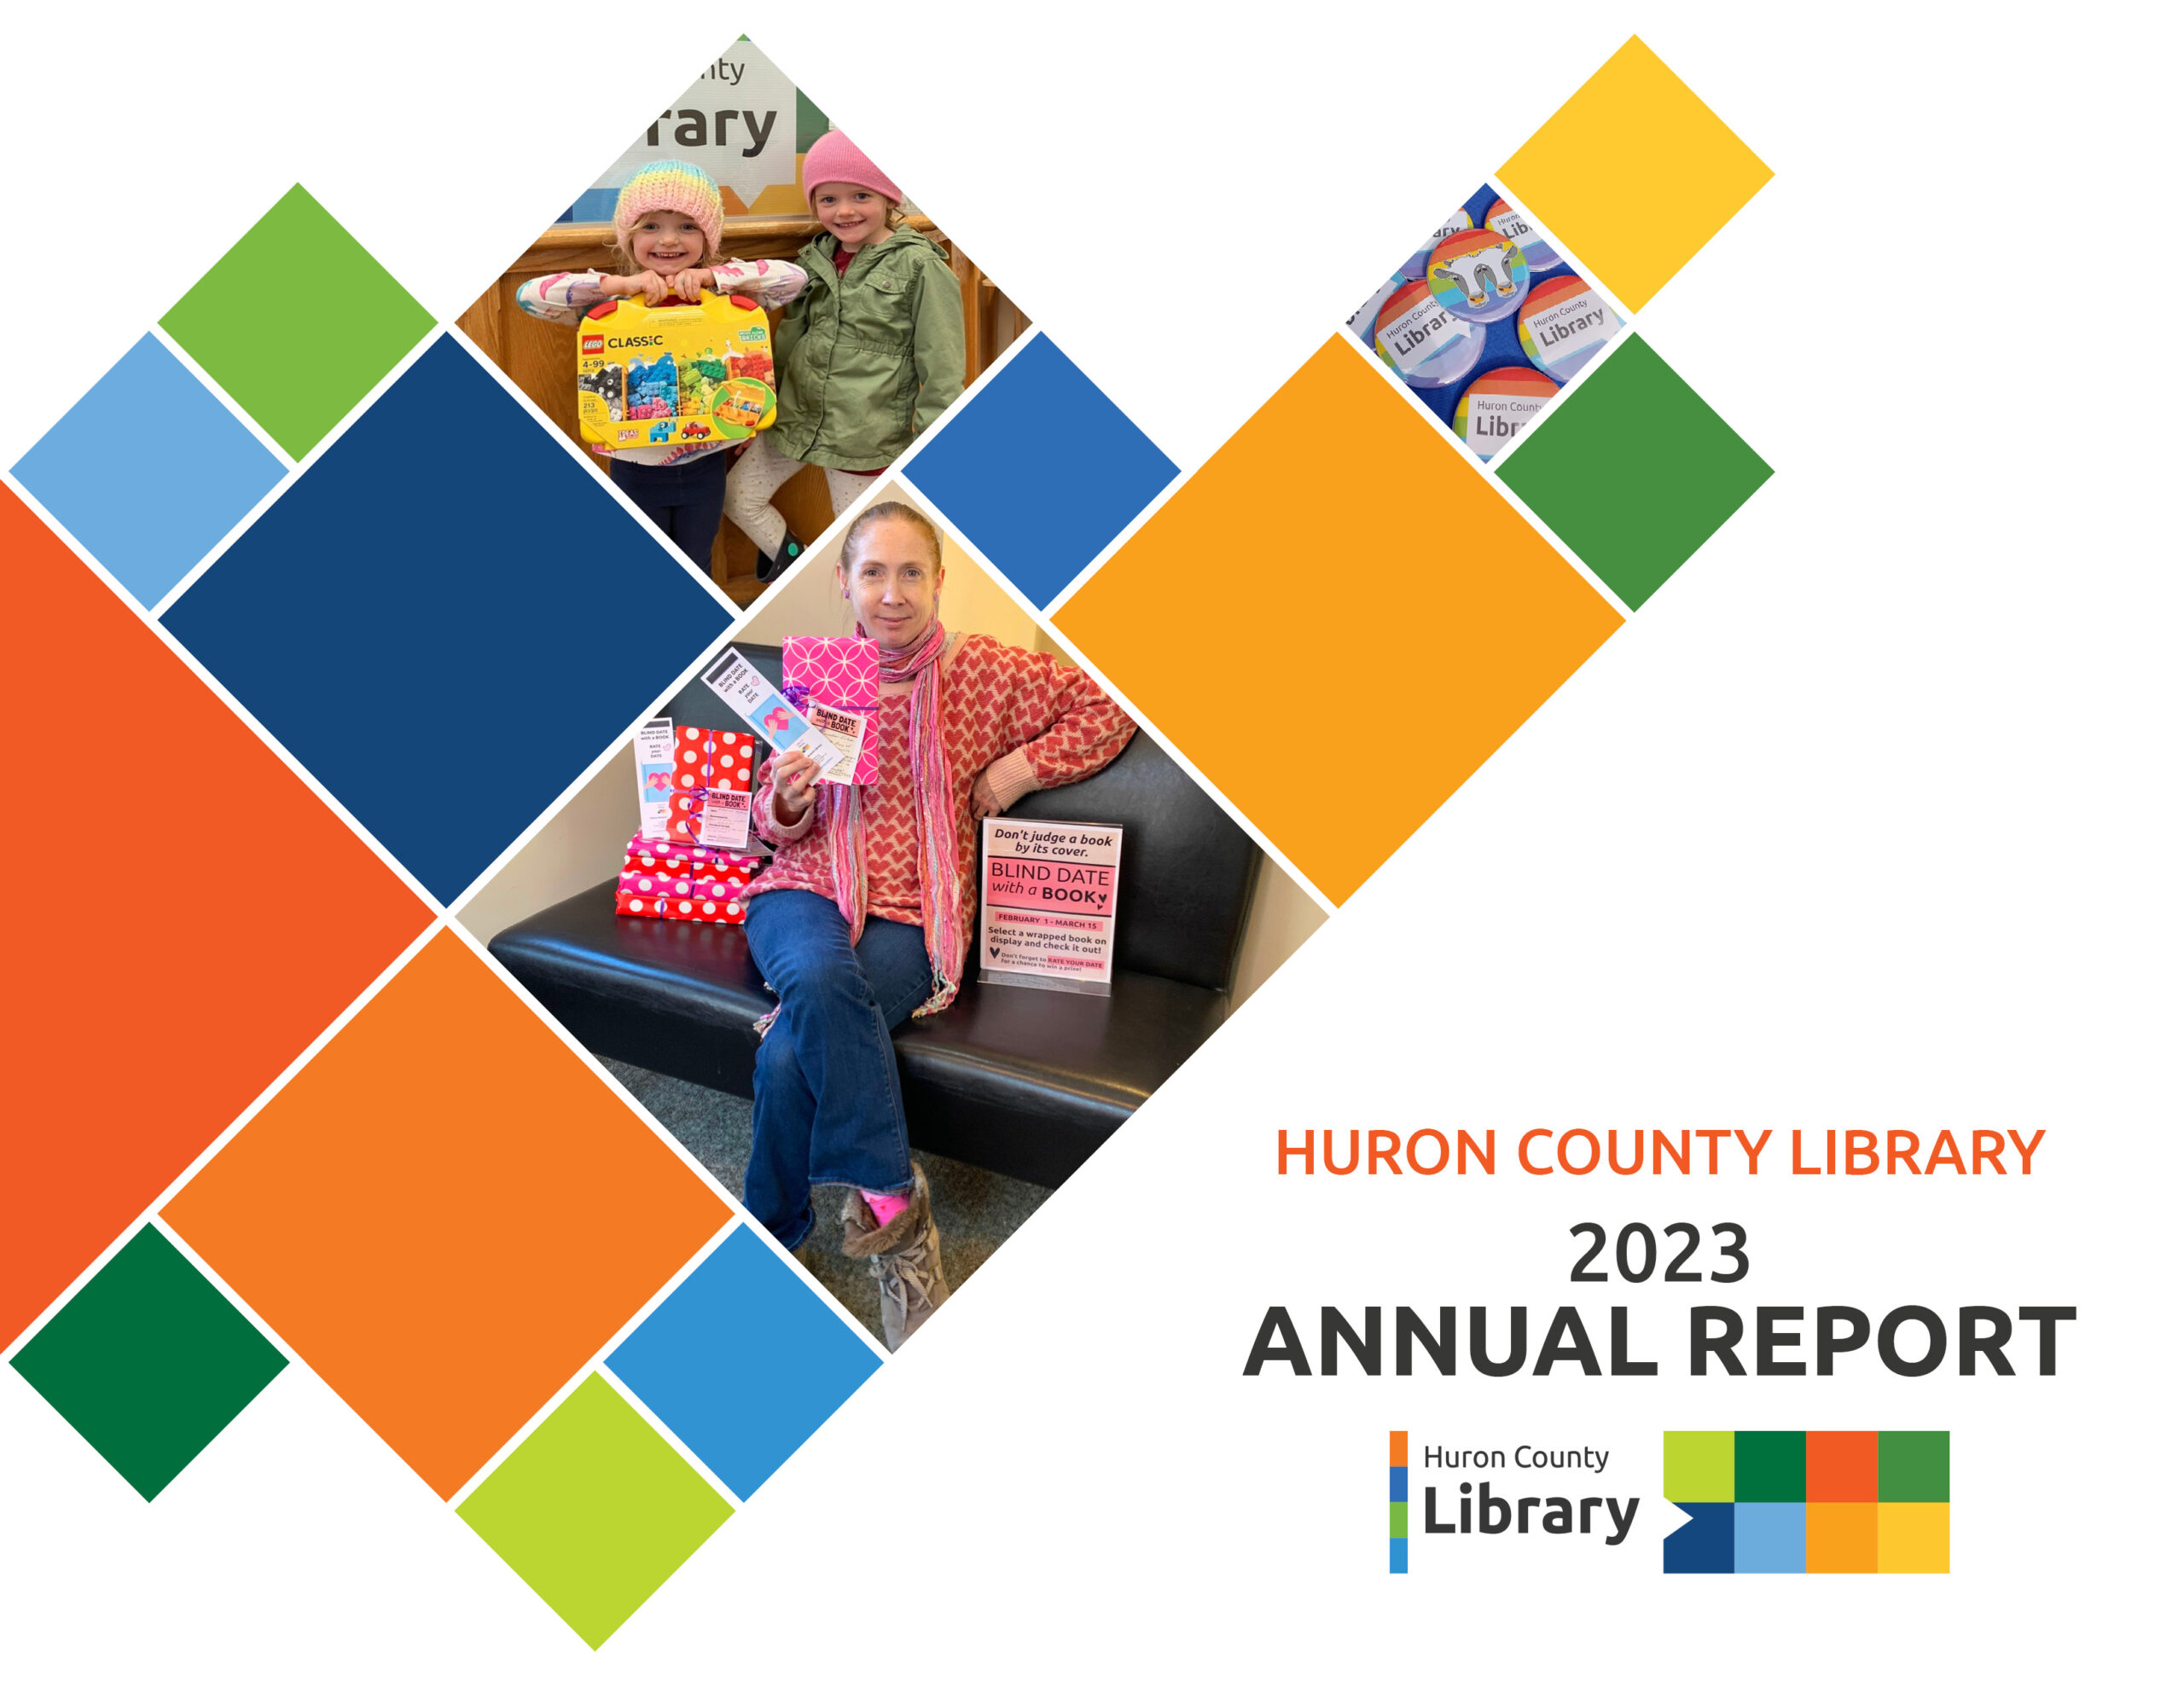 Cover image of the 2023 Huron County Library annual report